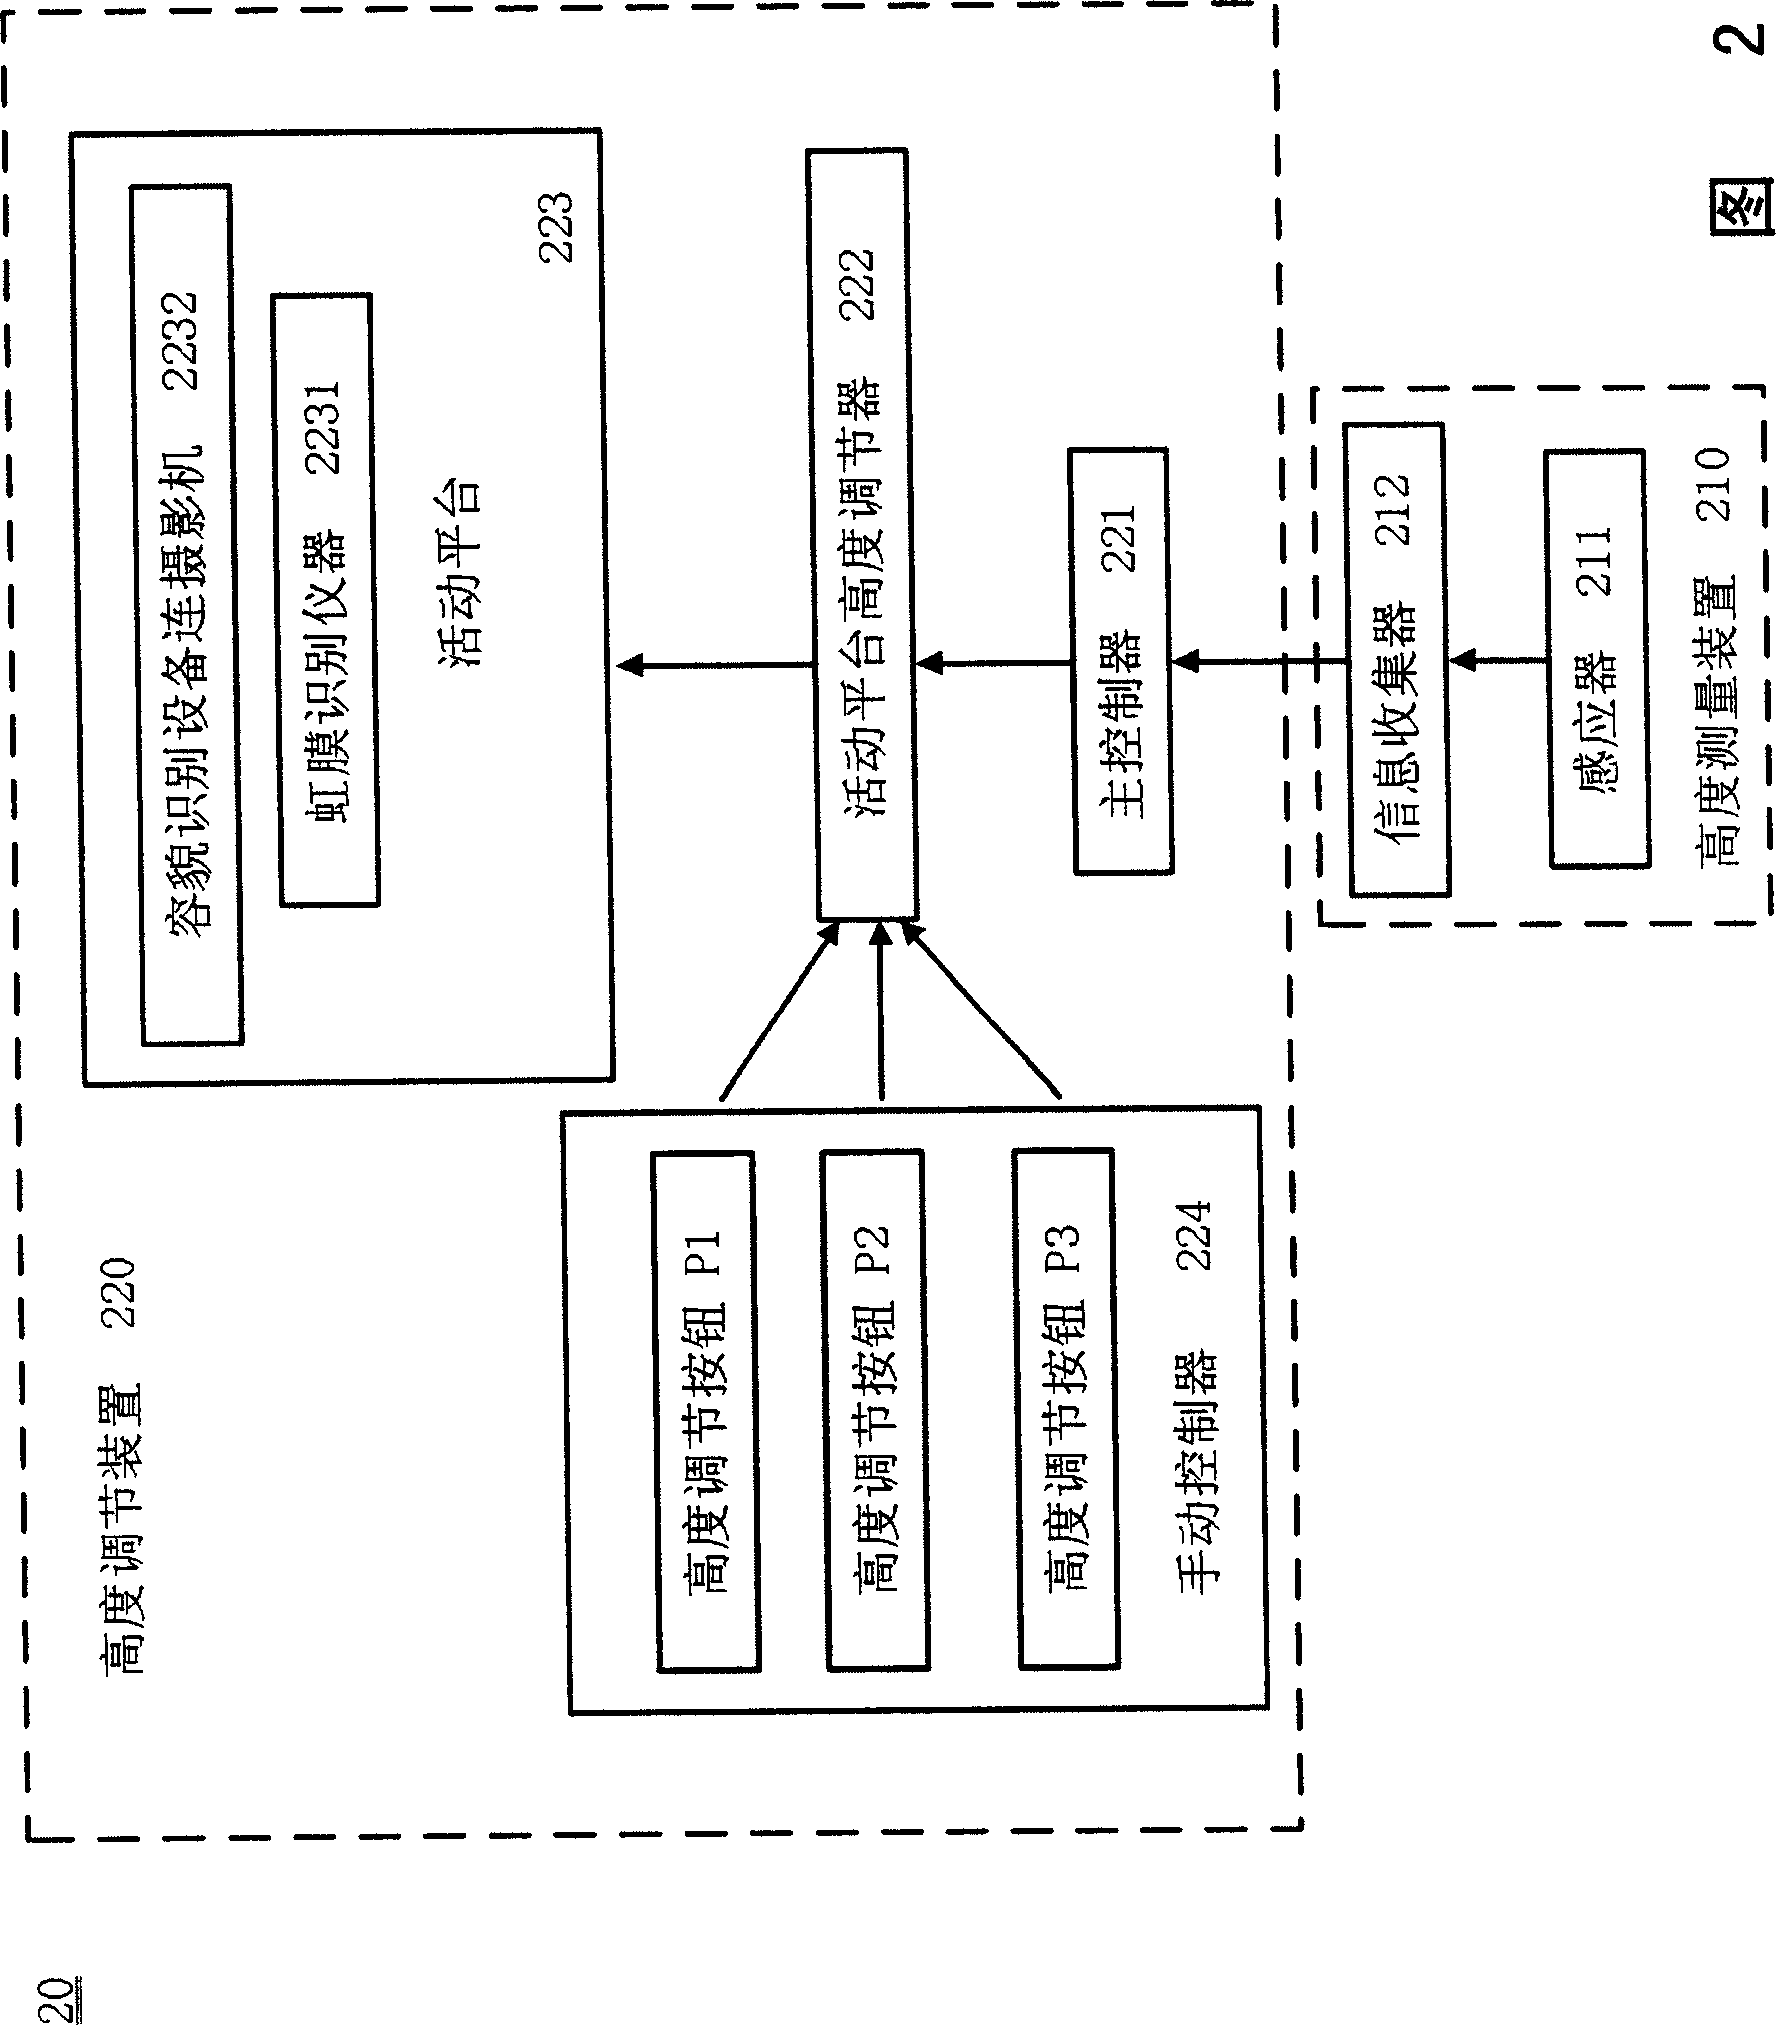 Biological identification access control device